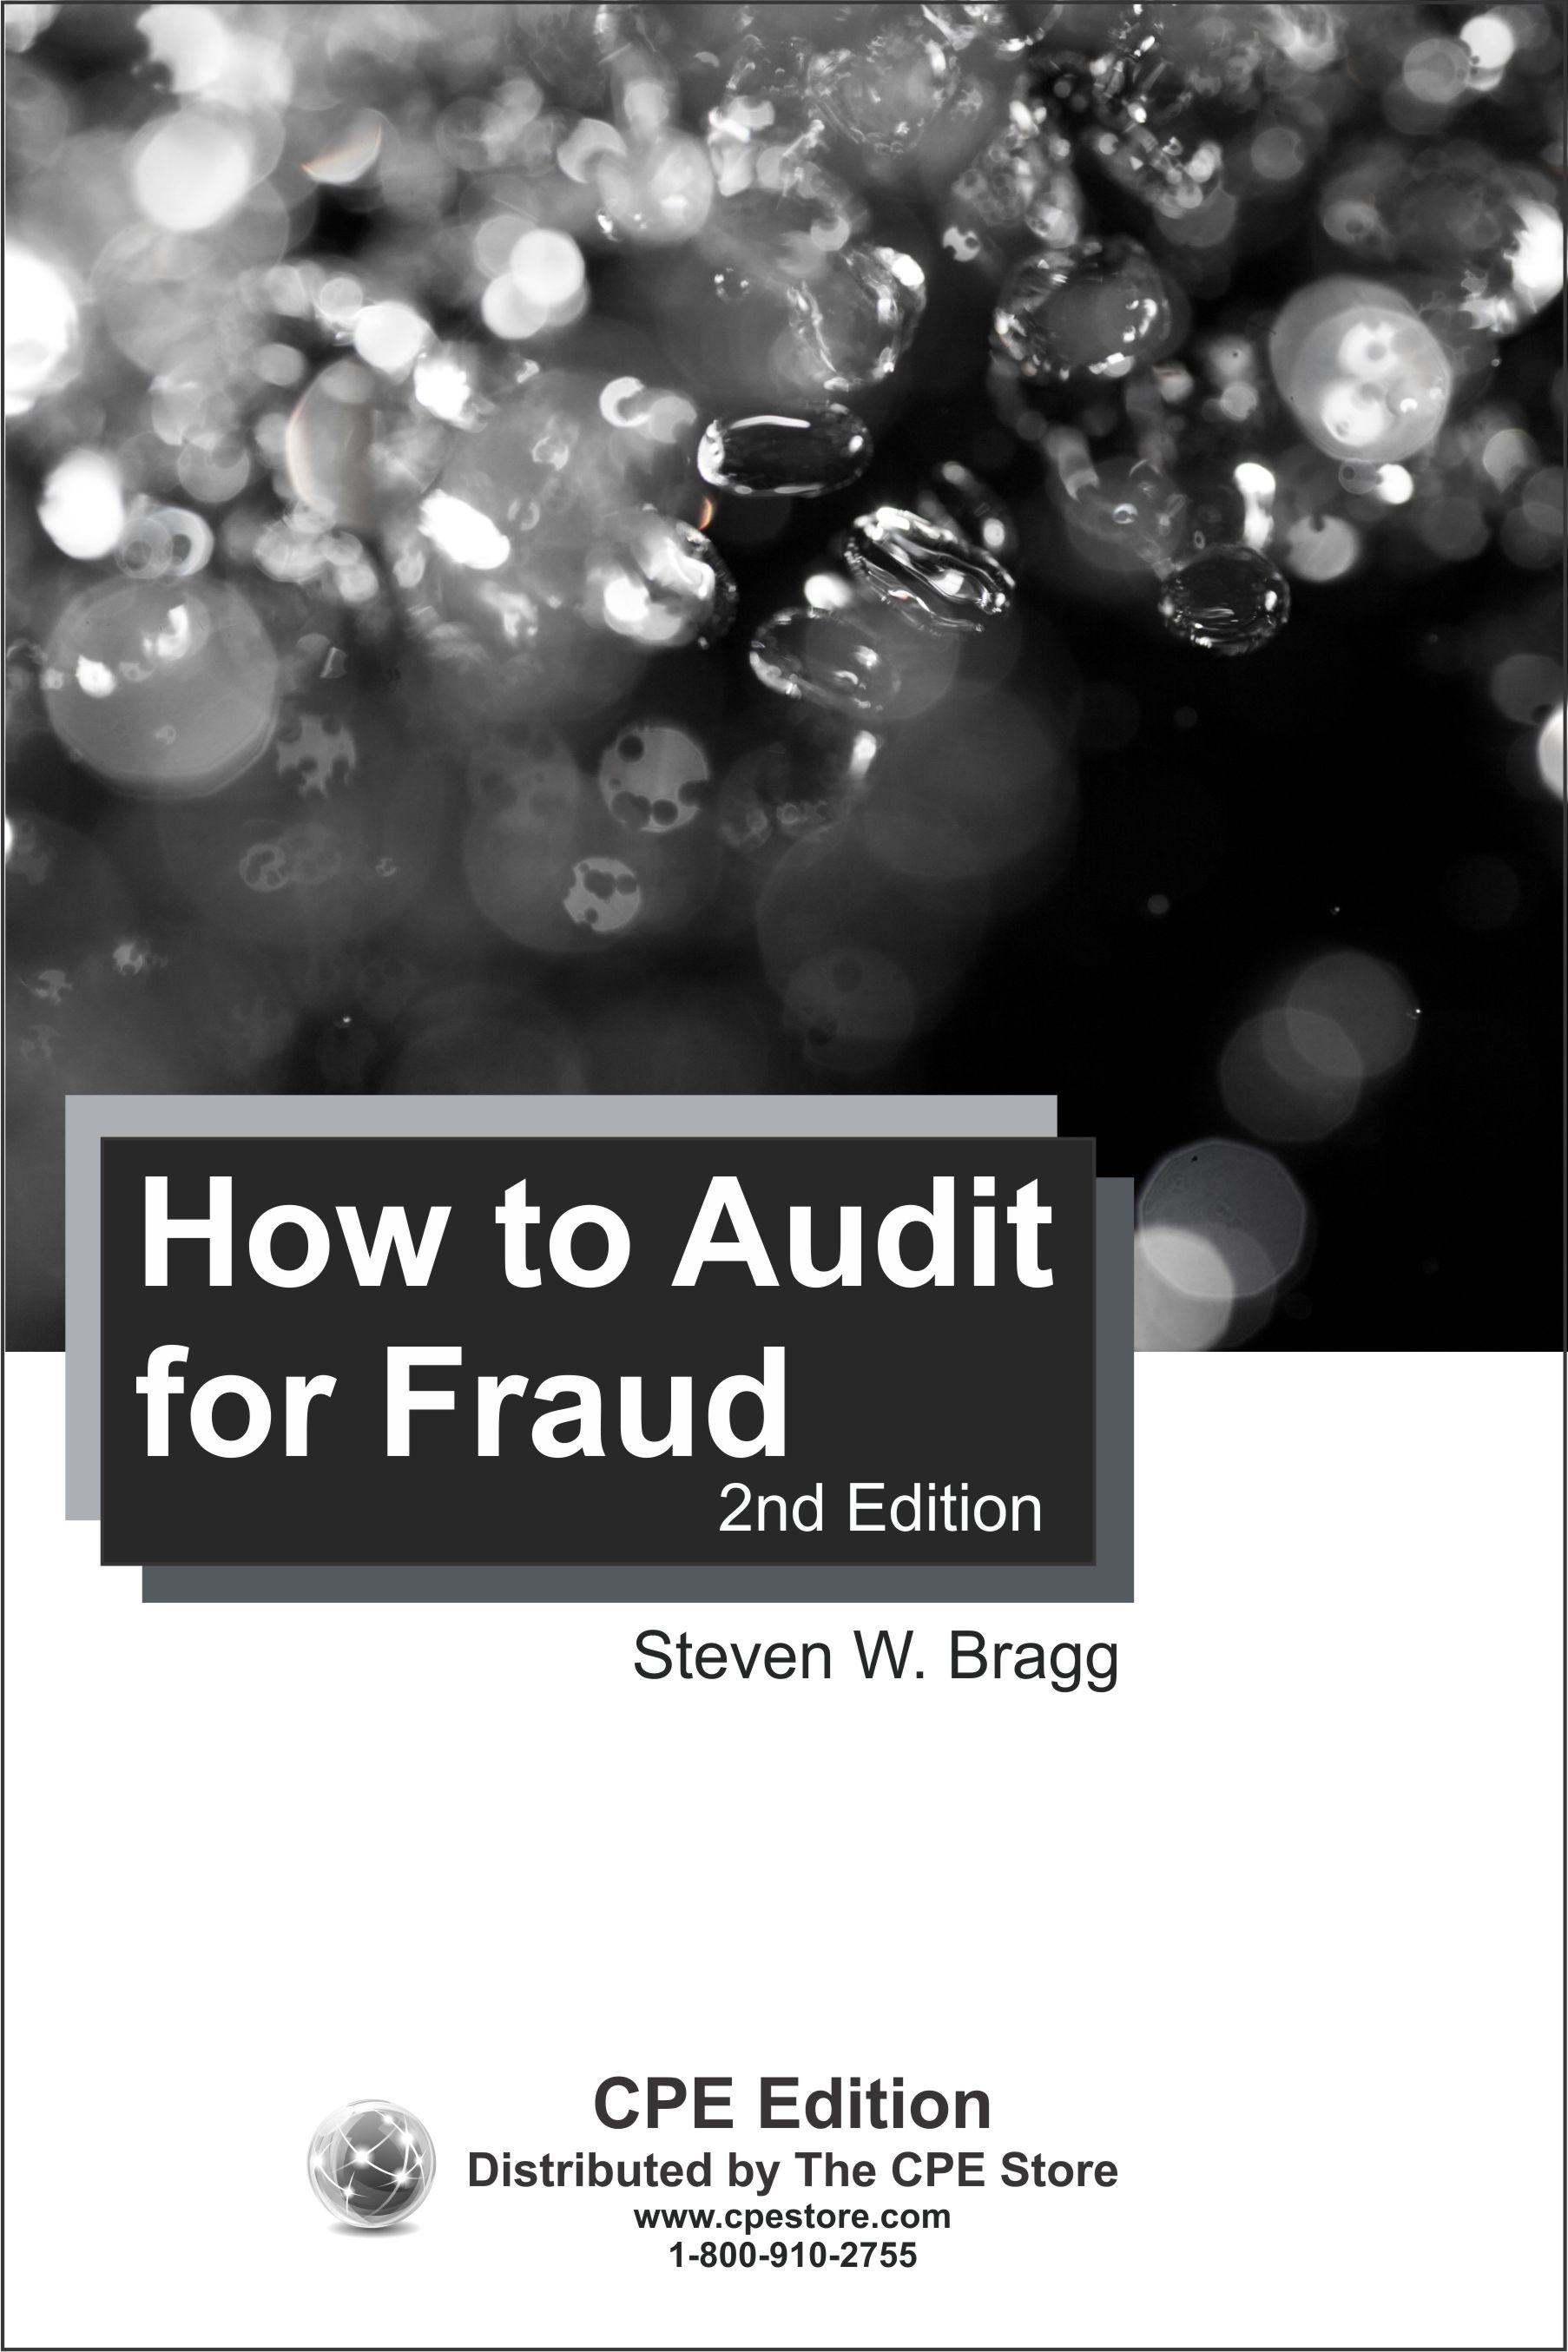 How to Audit for Fraud